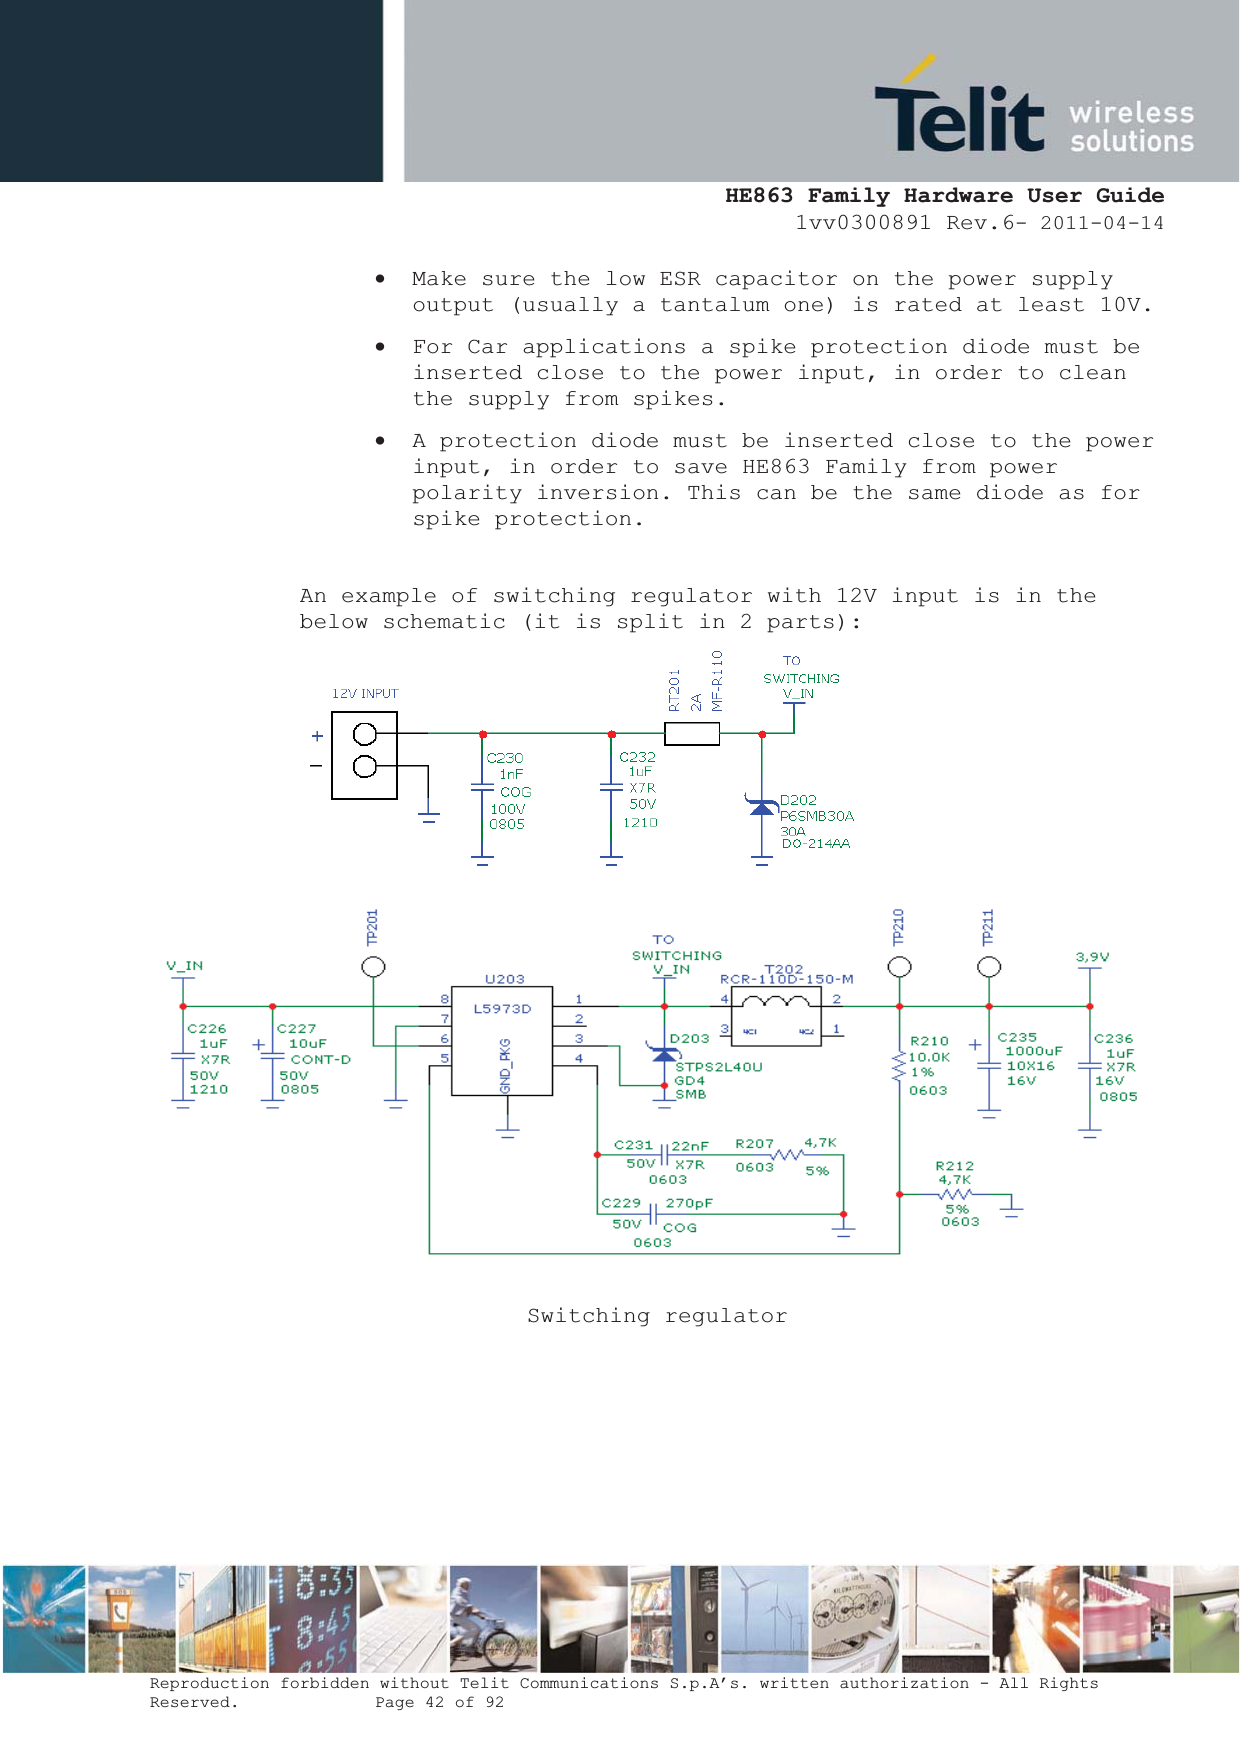  HE863 Family Hardware User Guide 1vv0300891 Rev.6- 2011-04-14    Reproduction forbidden without Telit Communications S.p.A’s. written authorization - All Rights Reserved.    Page 42 of 92  x Make sure the low ESR capacitor on the power supply output (usually a tantalum one) is rated at least 10V. x For Car applications a spike protection diode must be inserted close to the power input, in order to clean the supply from spikes.  x A protection diode must be inserted close to the power input, in order to save HE863 Family from power polarity inversion. This can be the same diode as for spike protection.  An example of switching regulator with 12V input is in the below schematic (it is split in 2 parts):  Switching regulator      